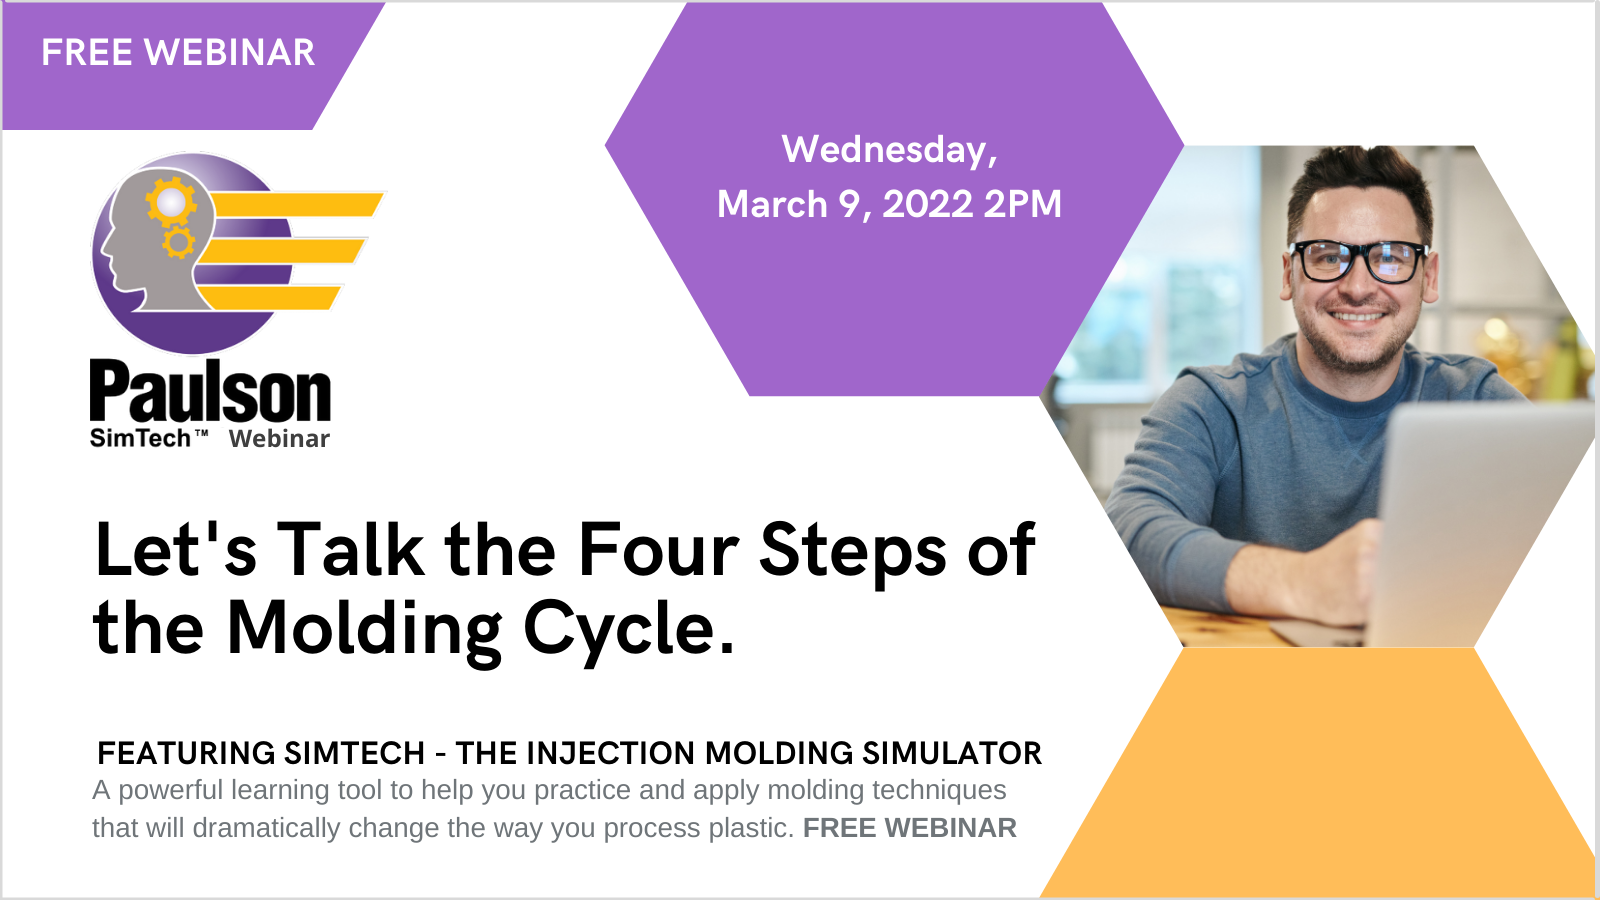 Webinar: Let’s Talk the Four Steps of the Molding Cycle